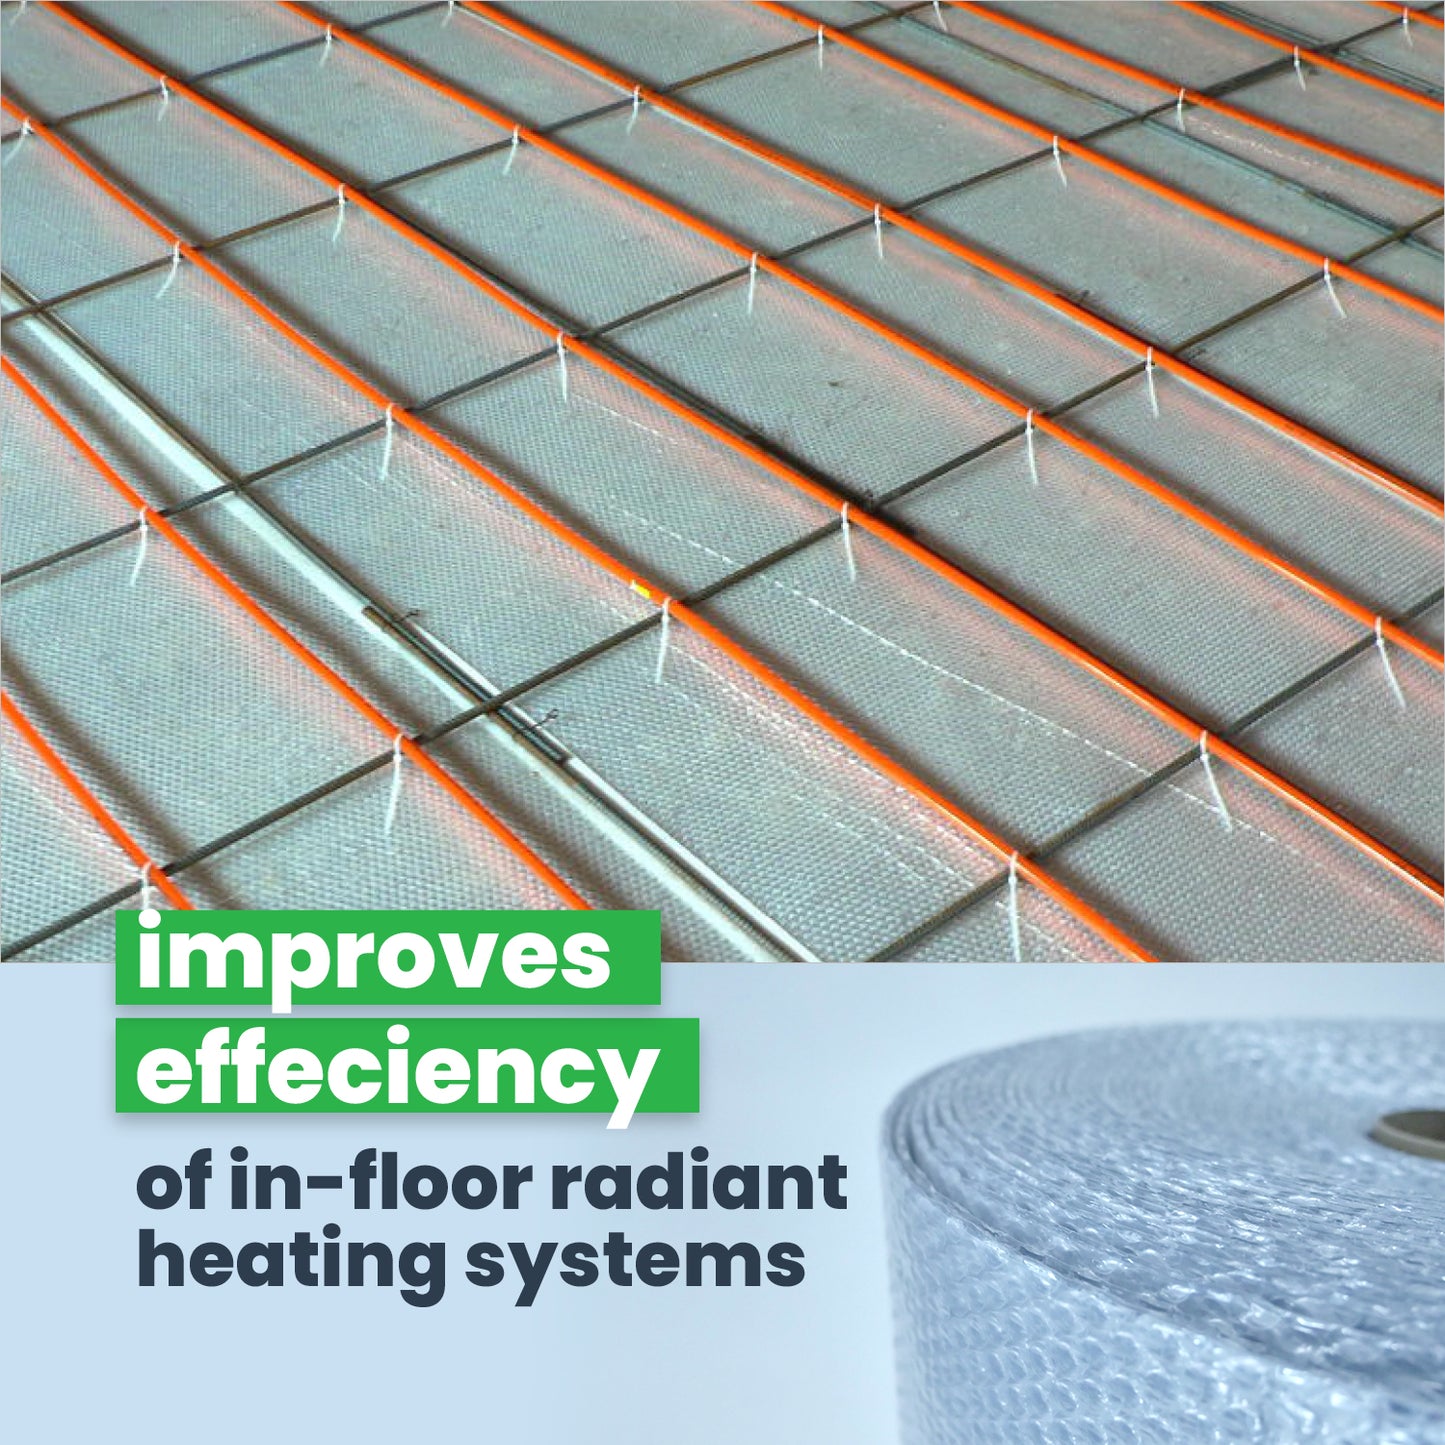 Improves efficiency of in-floor radiant heating systems